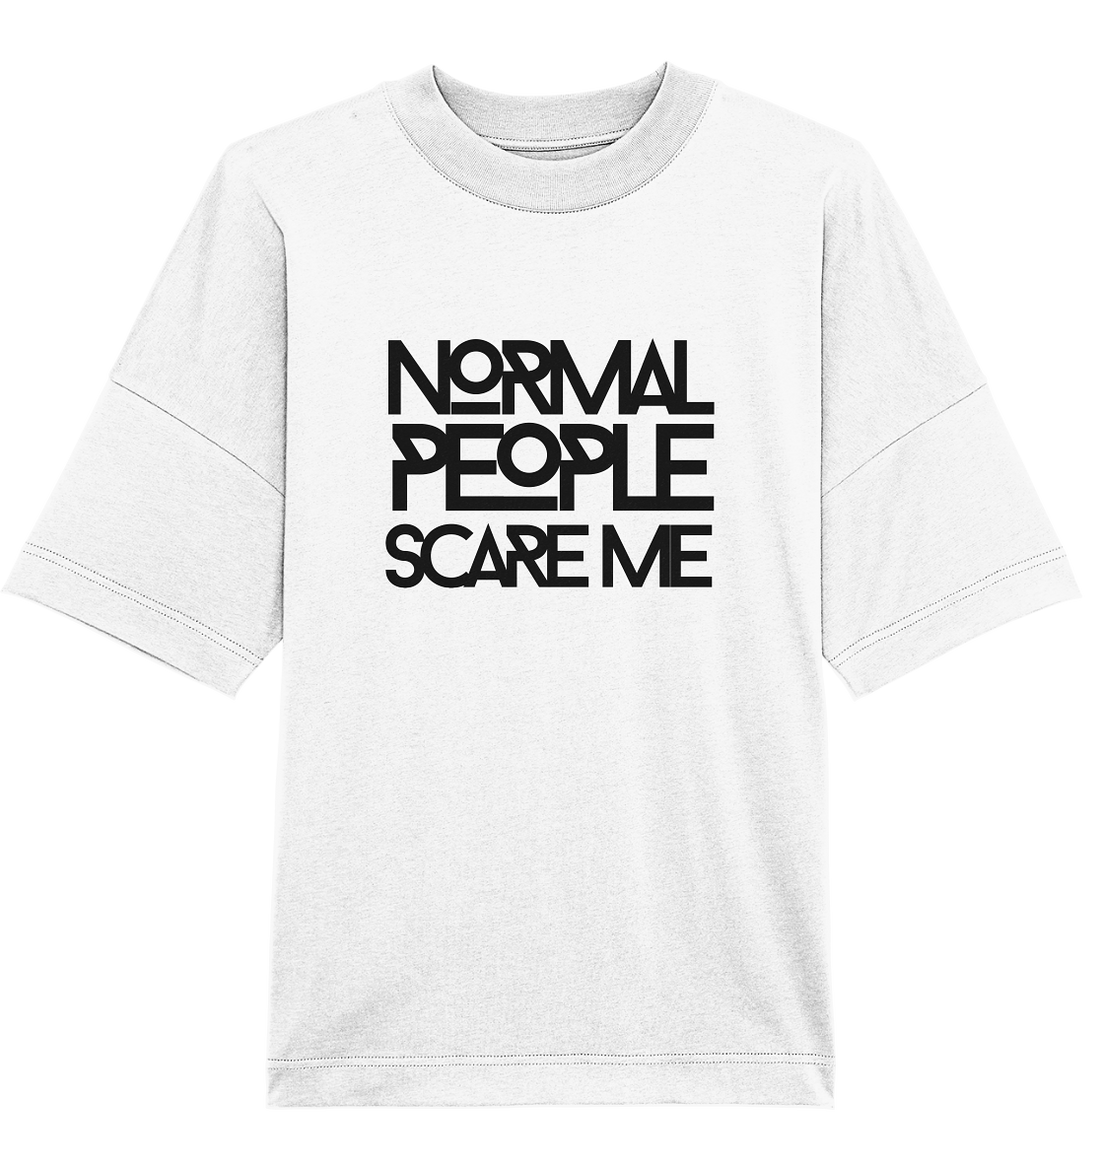 Normal people scare me - Oversized Unisex T-Shirt